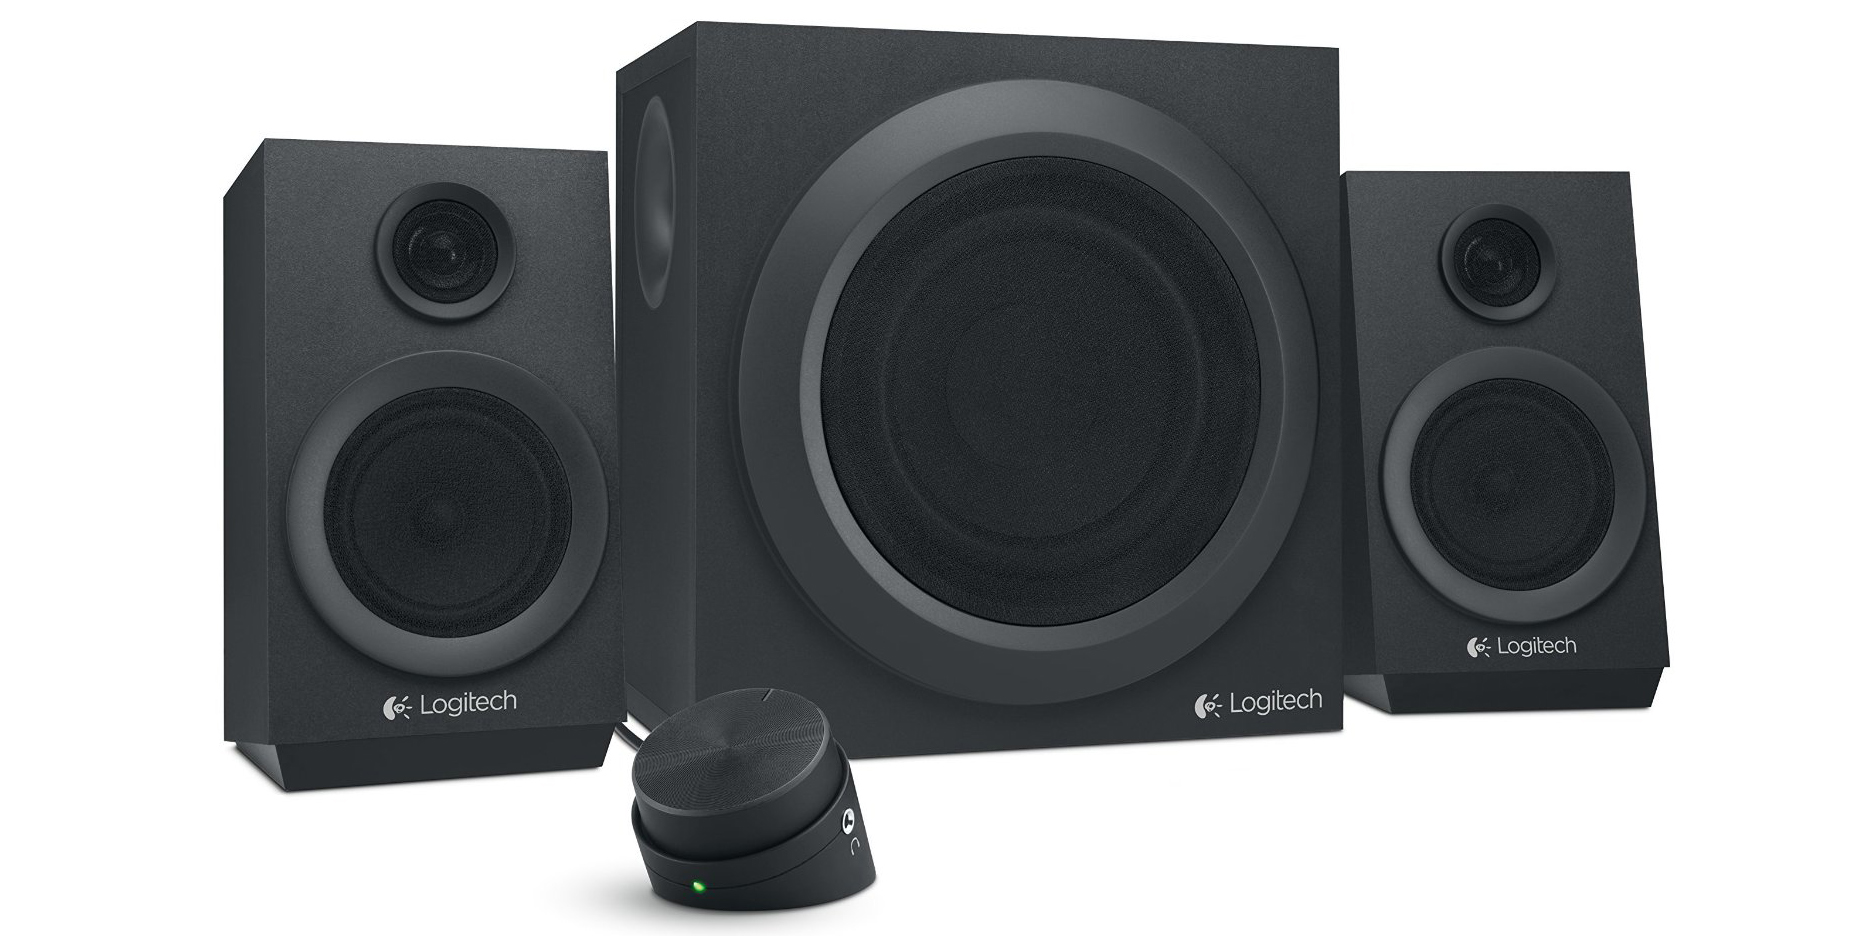 Add Logitech's Z333 2.1-channel speaker to your setup for $48 $65+)